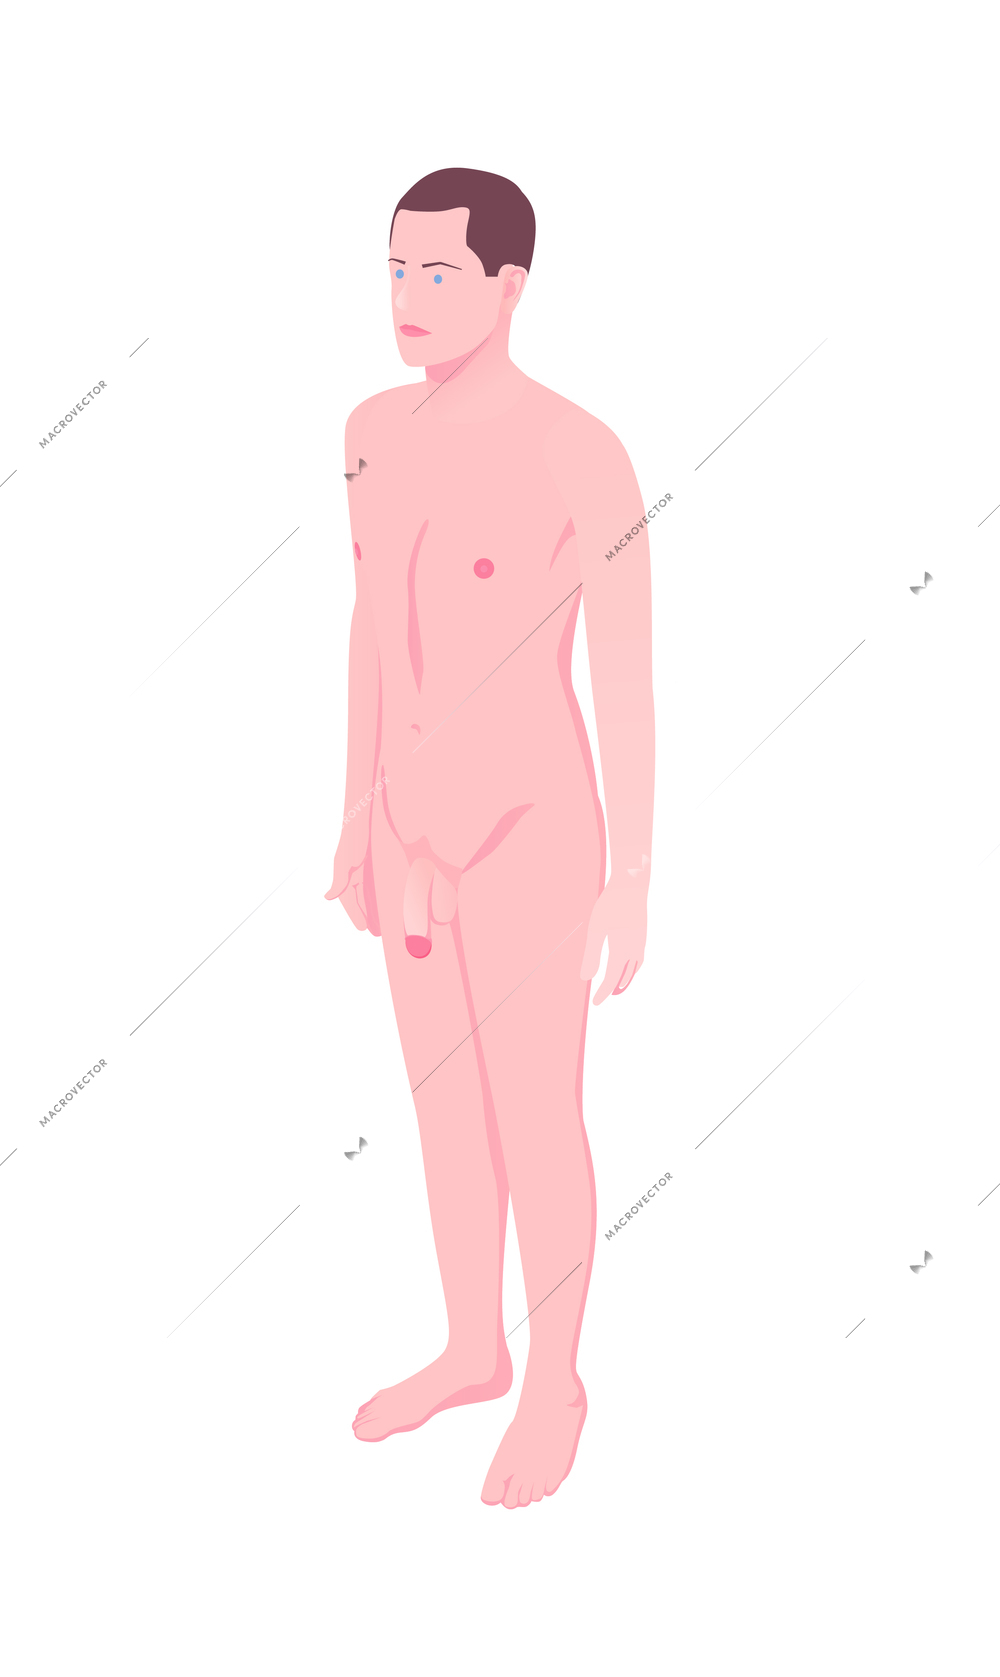 Male human body on white background 3d isometric vector illustration